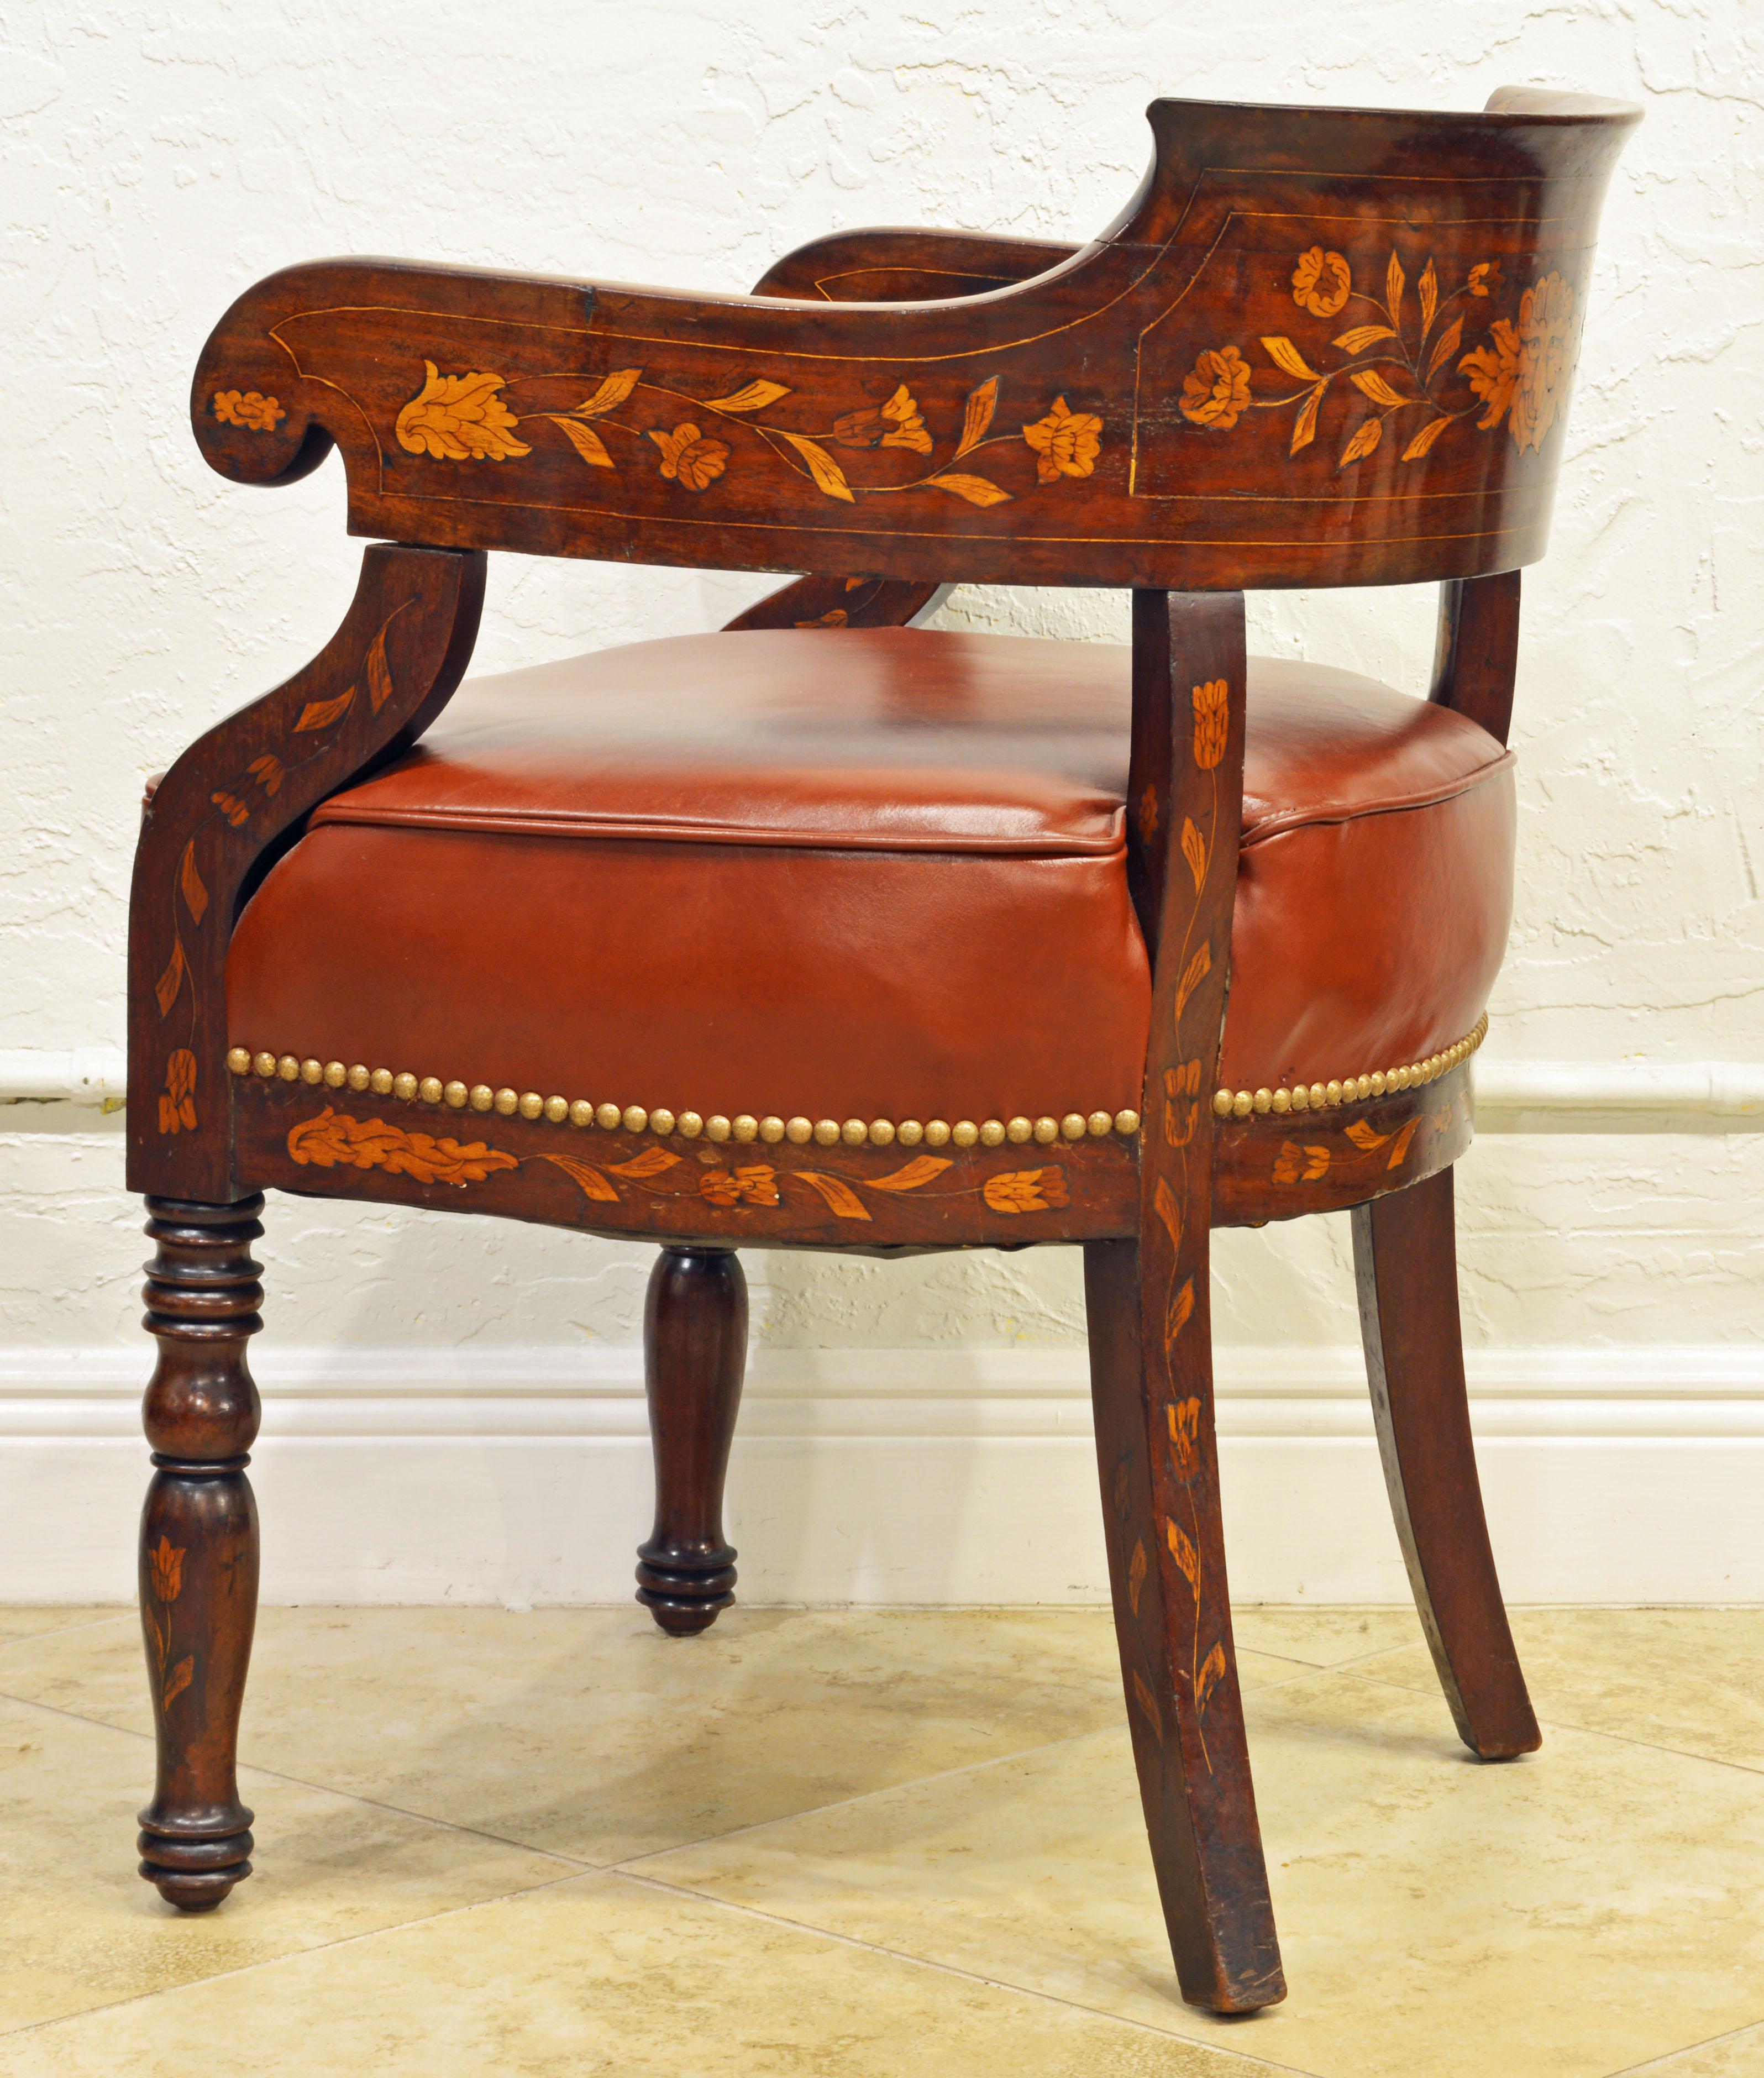 Inlay Mid-19th Century Elaborately Inlaid Dutch Colonial Leather Covered Armchair